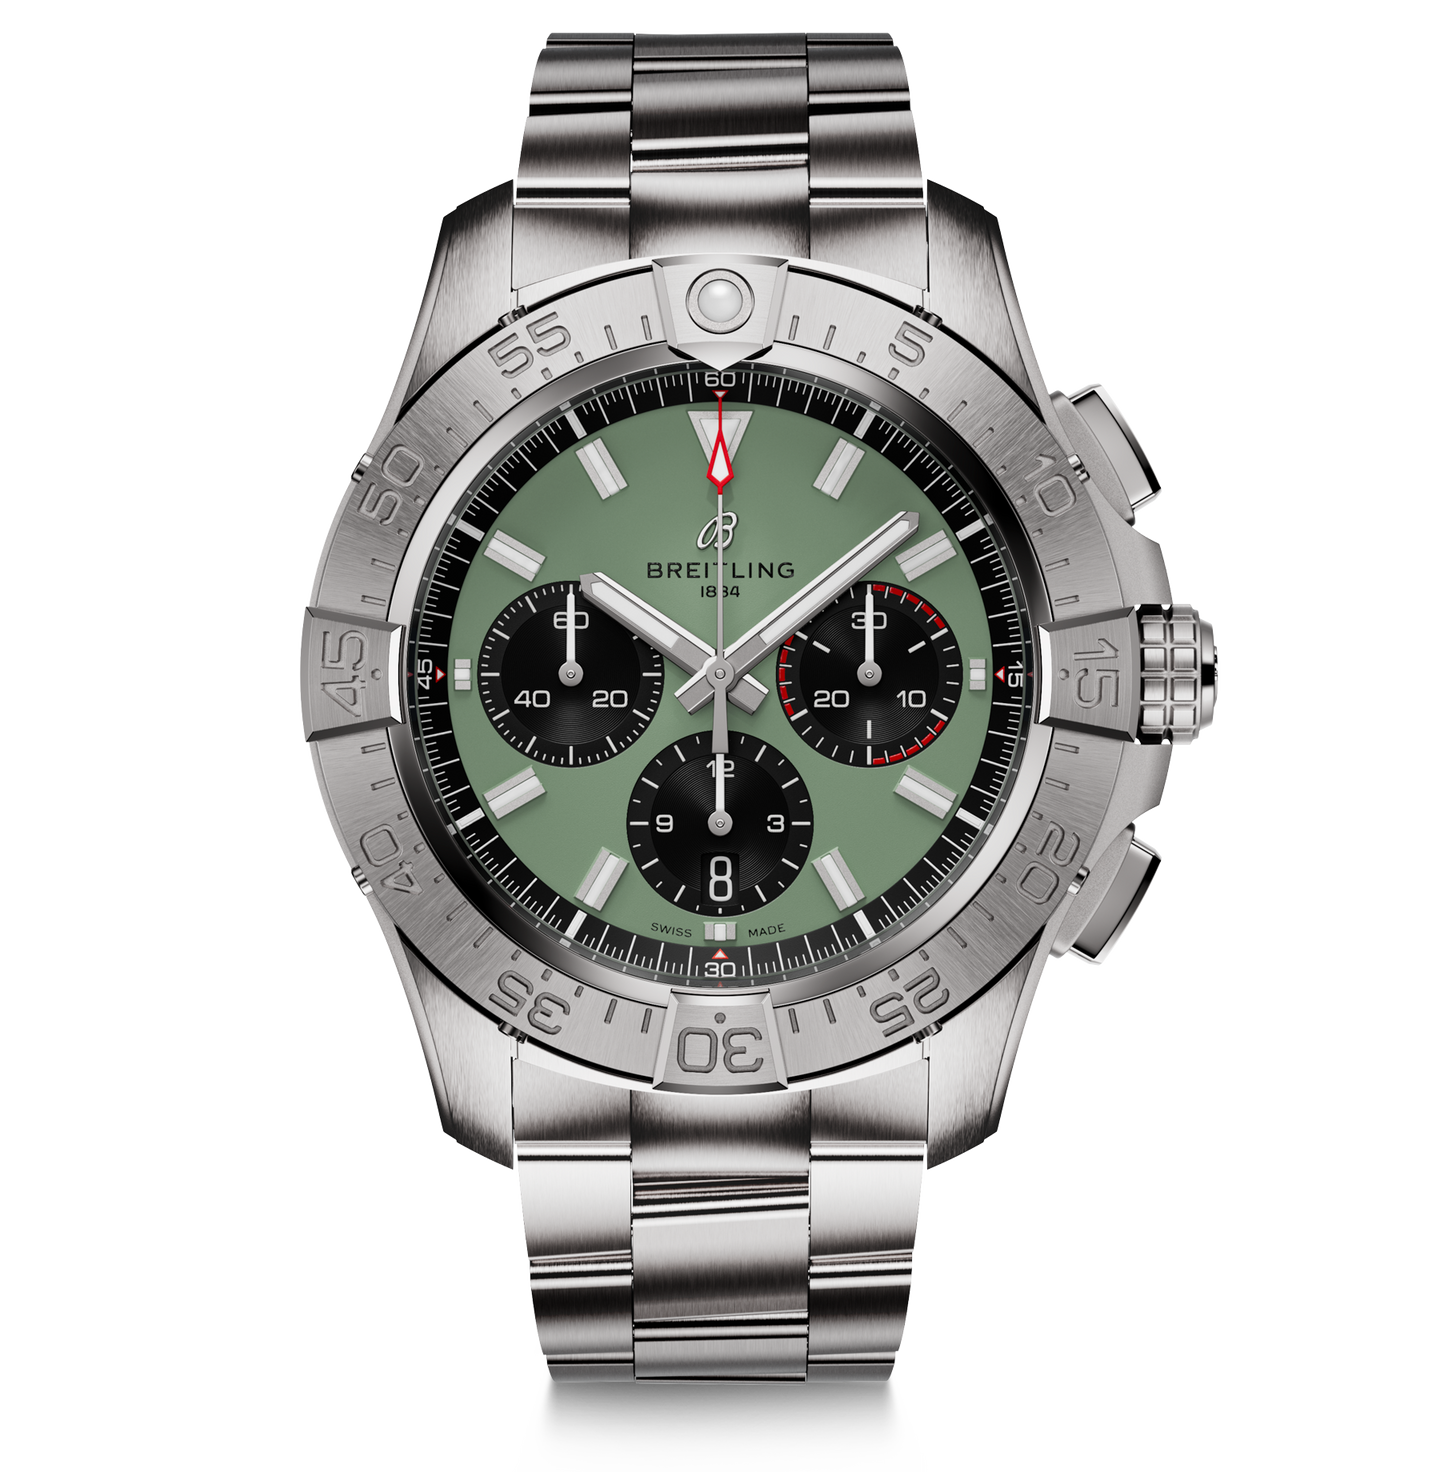 Breitling Avenger B01 Chronograph 44mm Watch with Green Dial